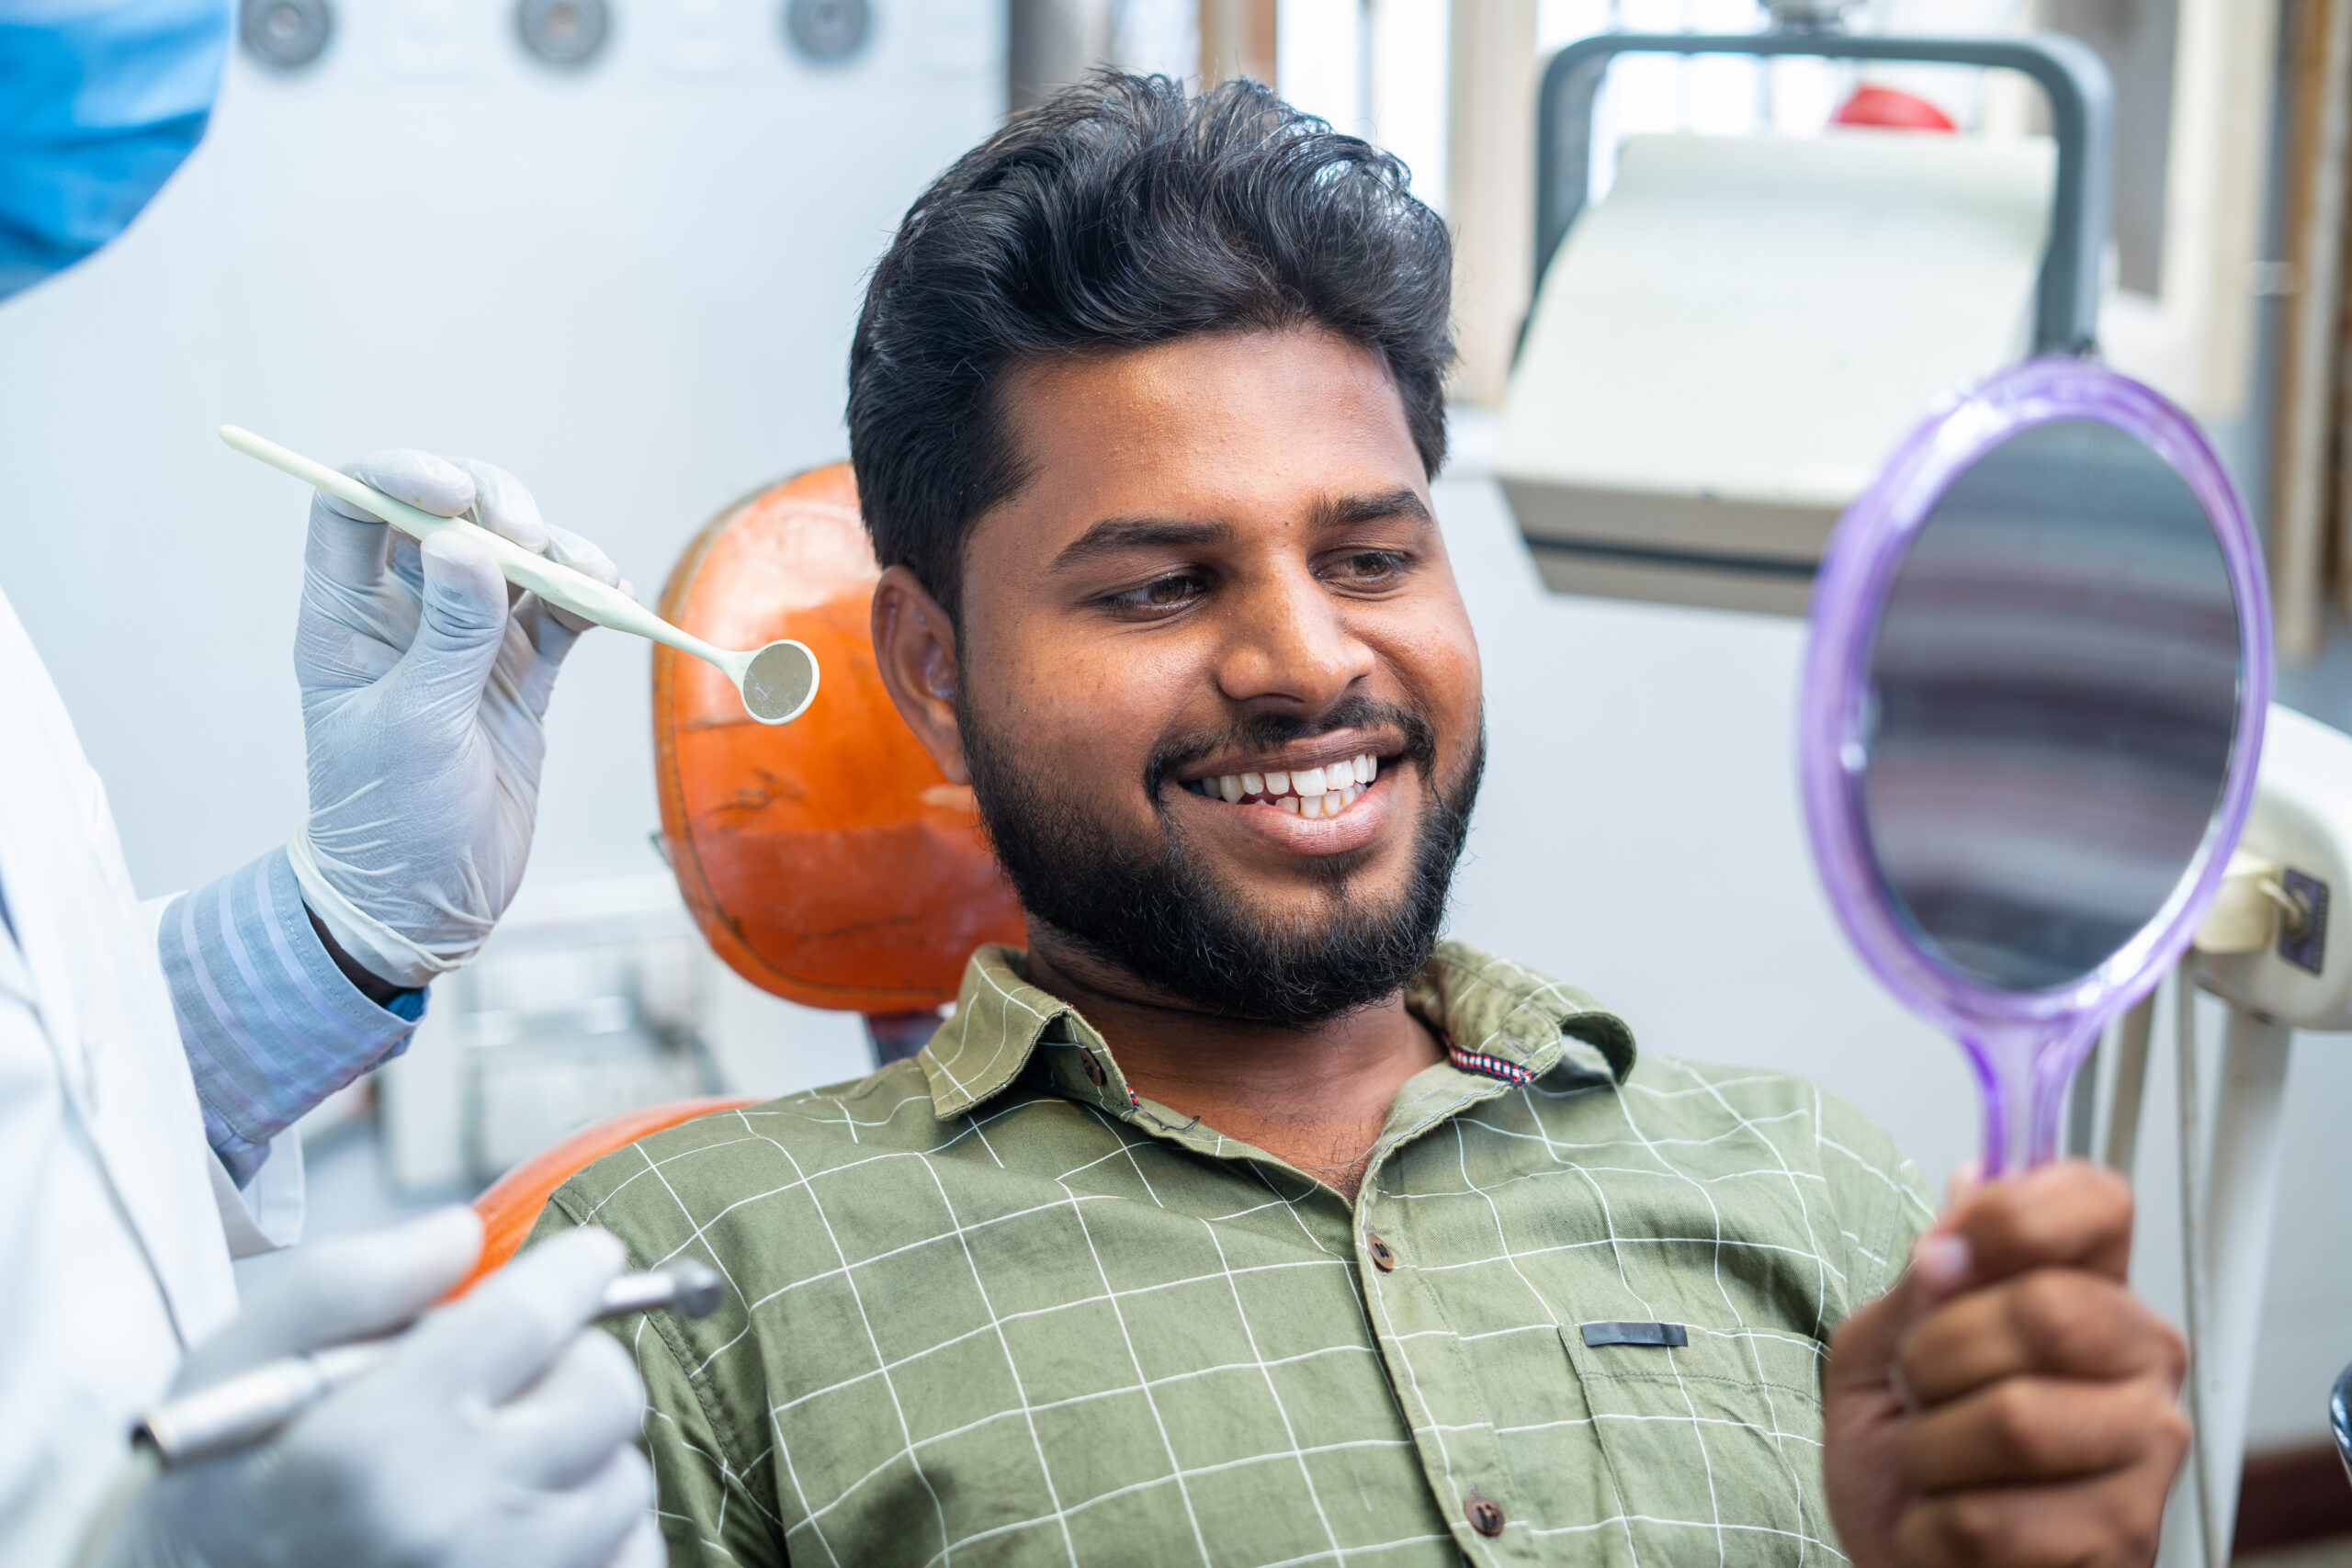 Young man with gleaming white teeth looks at his smile in a hand mirror after a teeth cleaning.